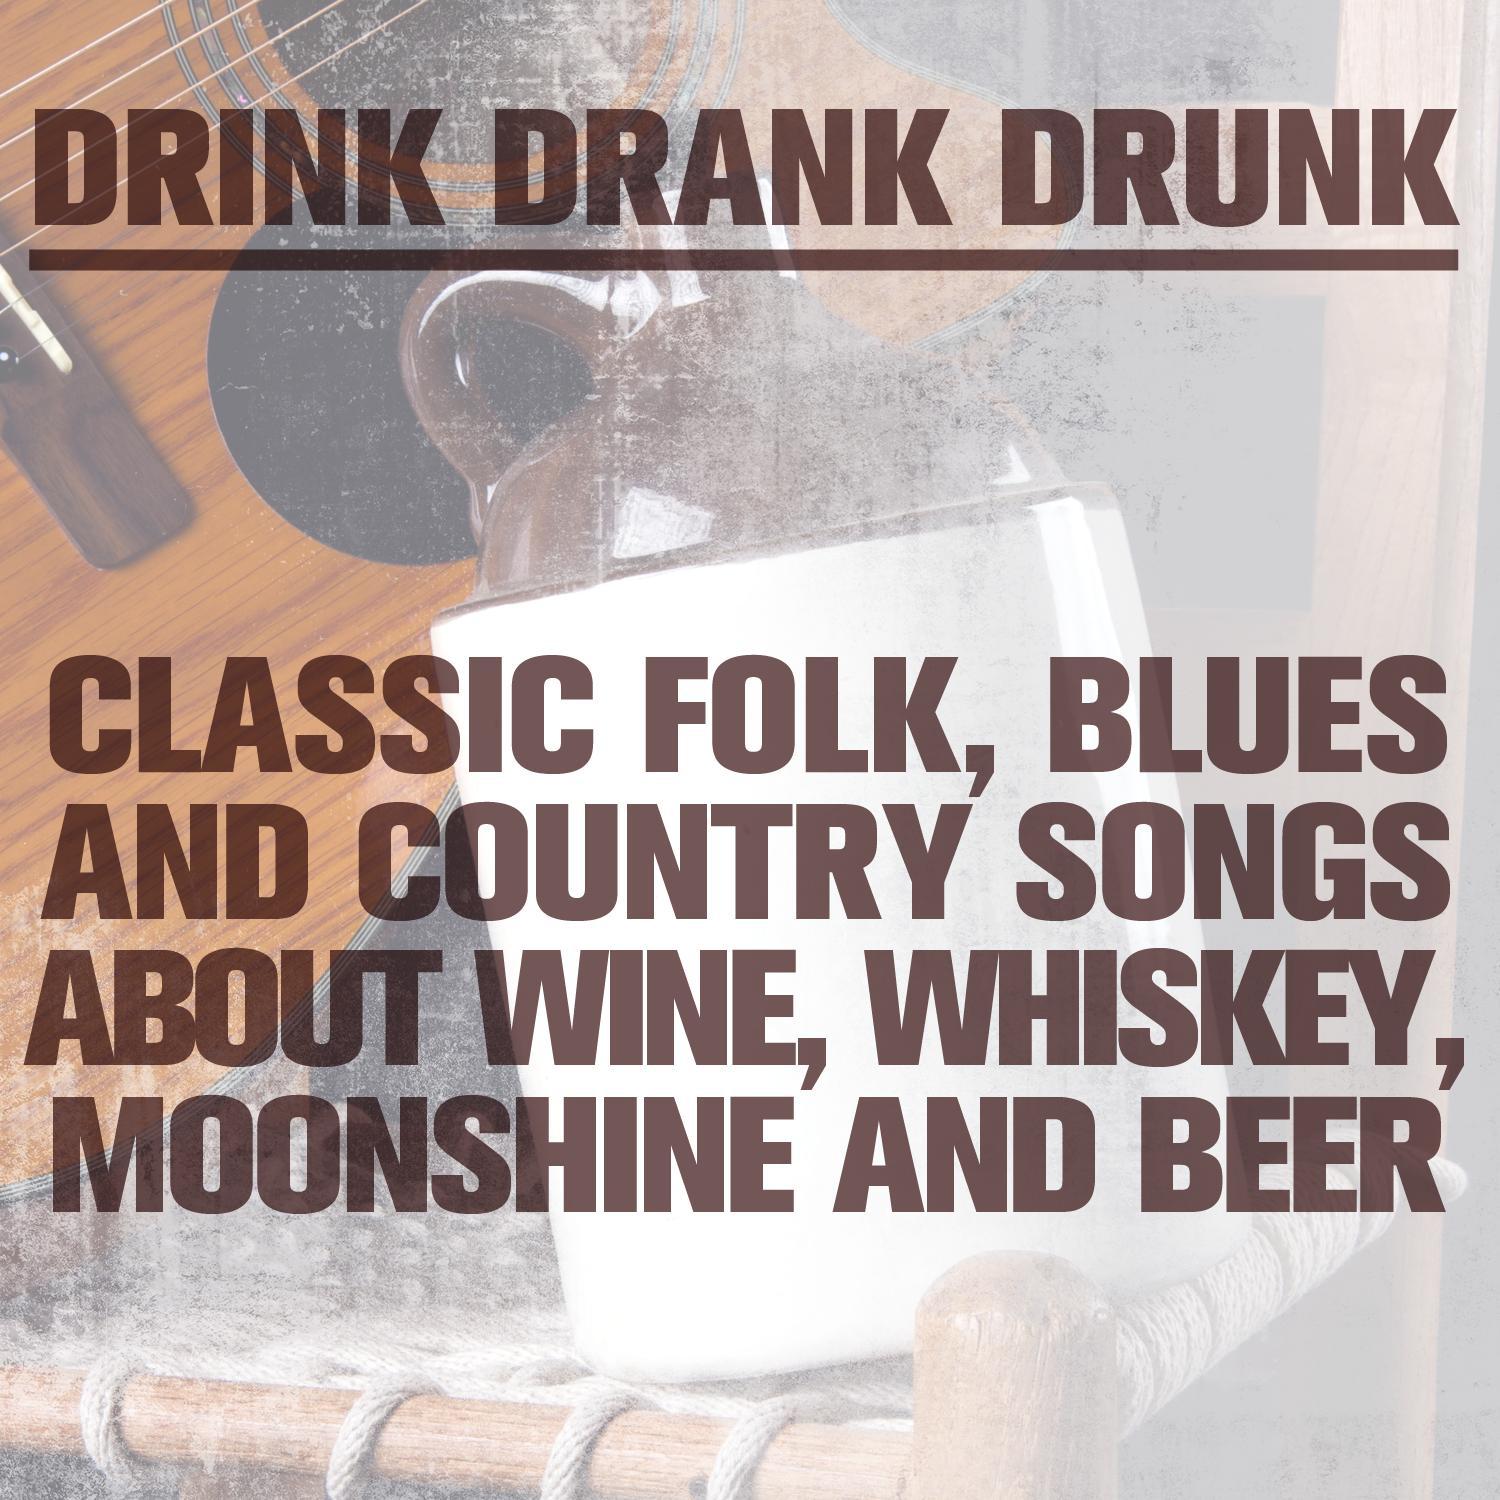 Drink Drank Drunk: Classic Folk, Blues and Country Songs About Wine, Whiskey, Moonshine & Beer